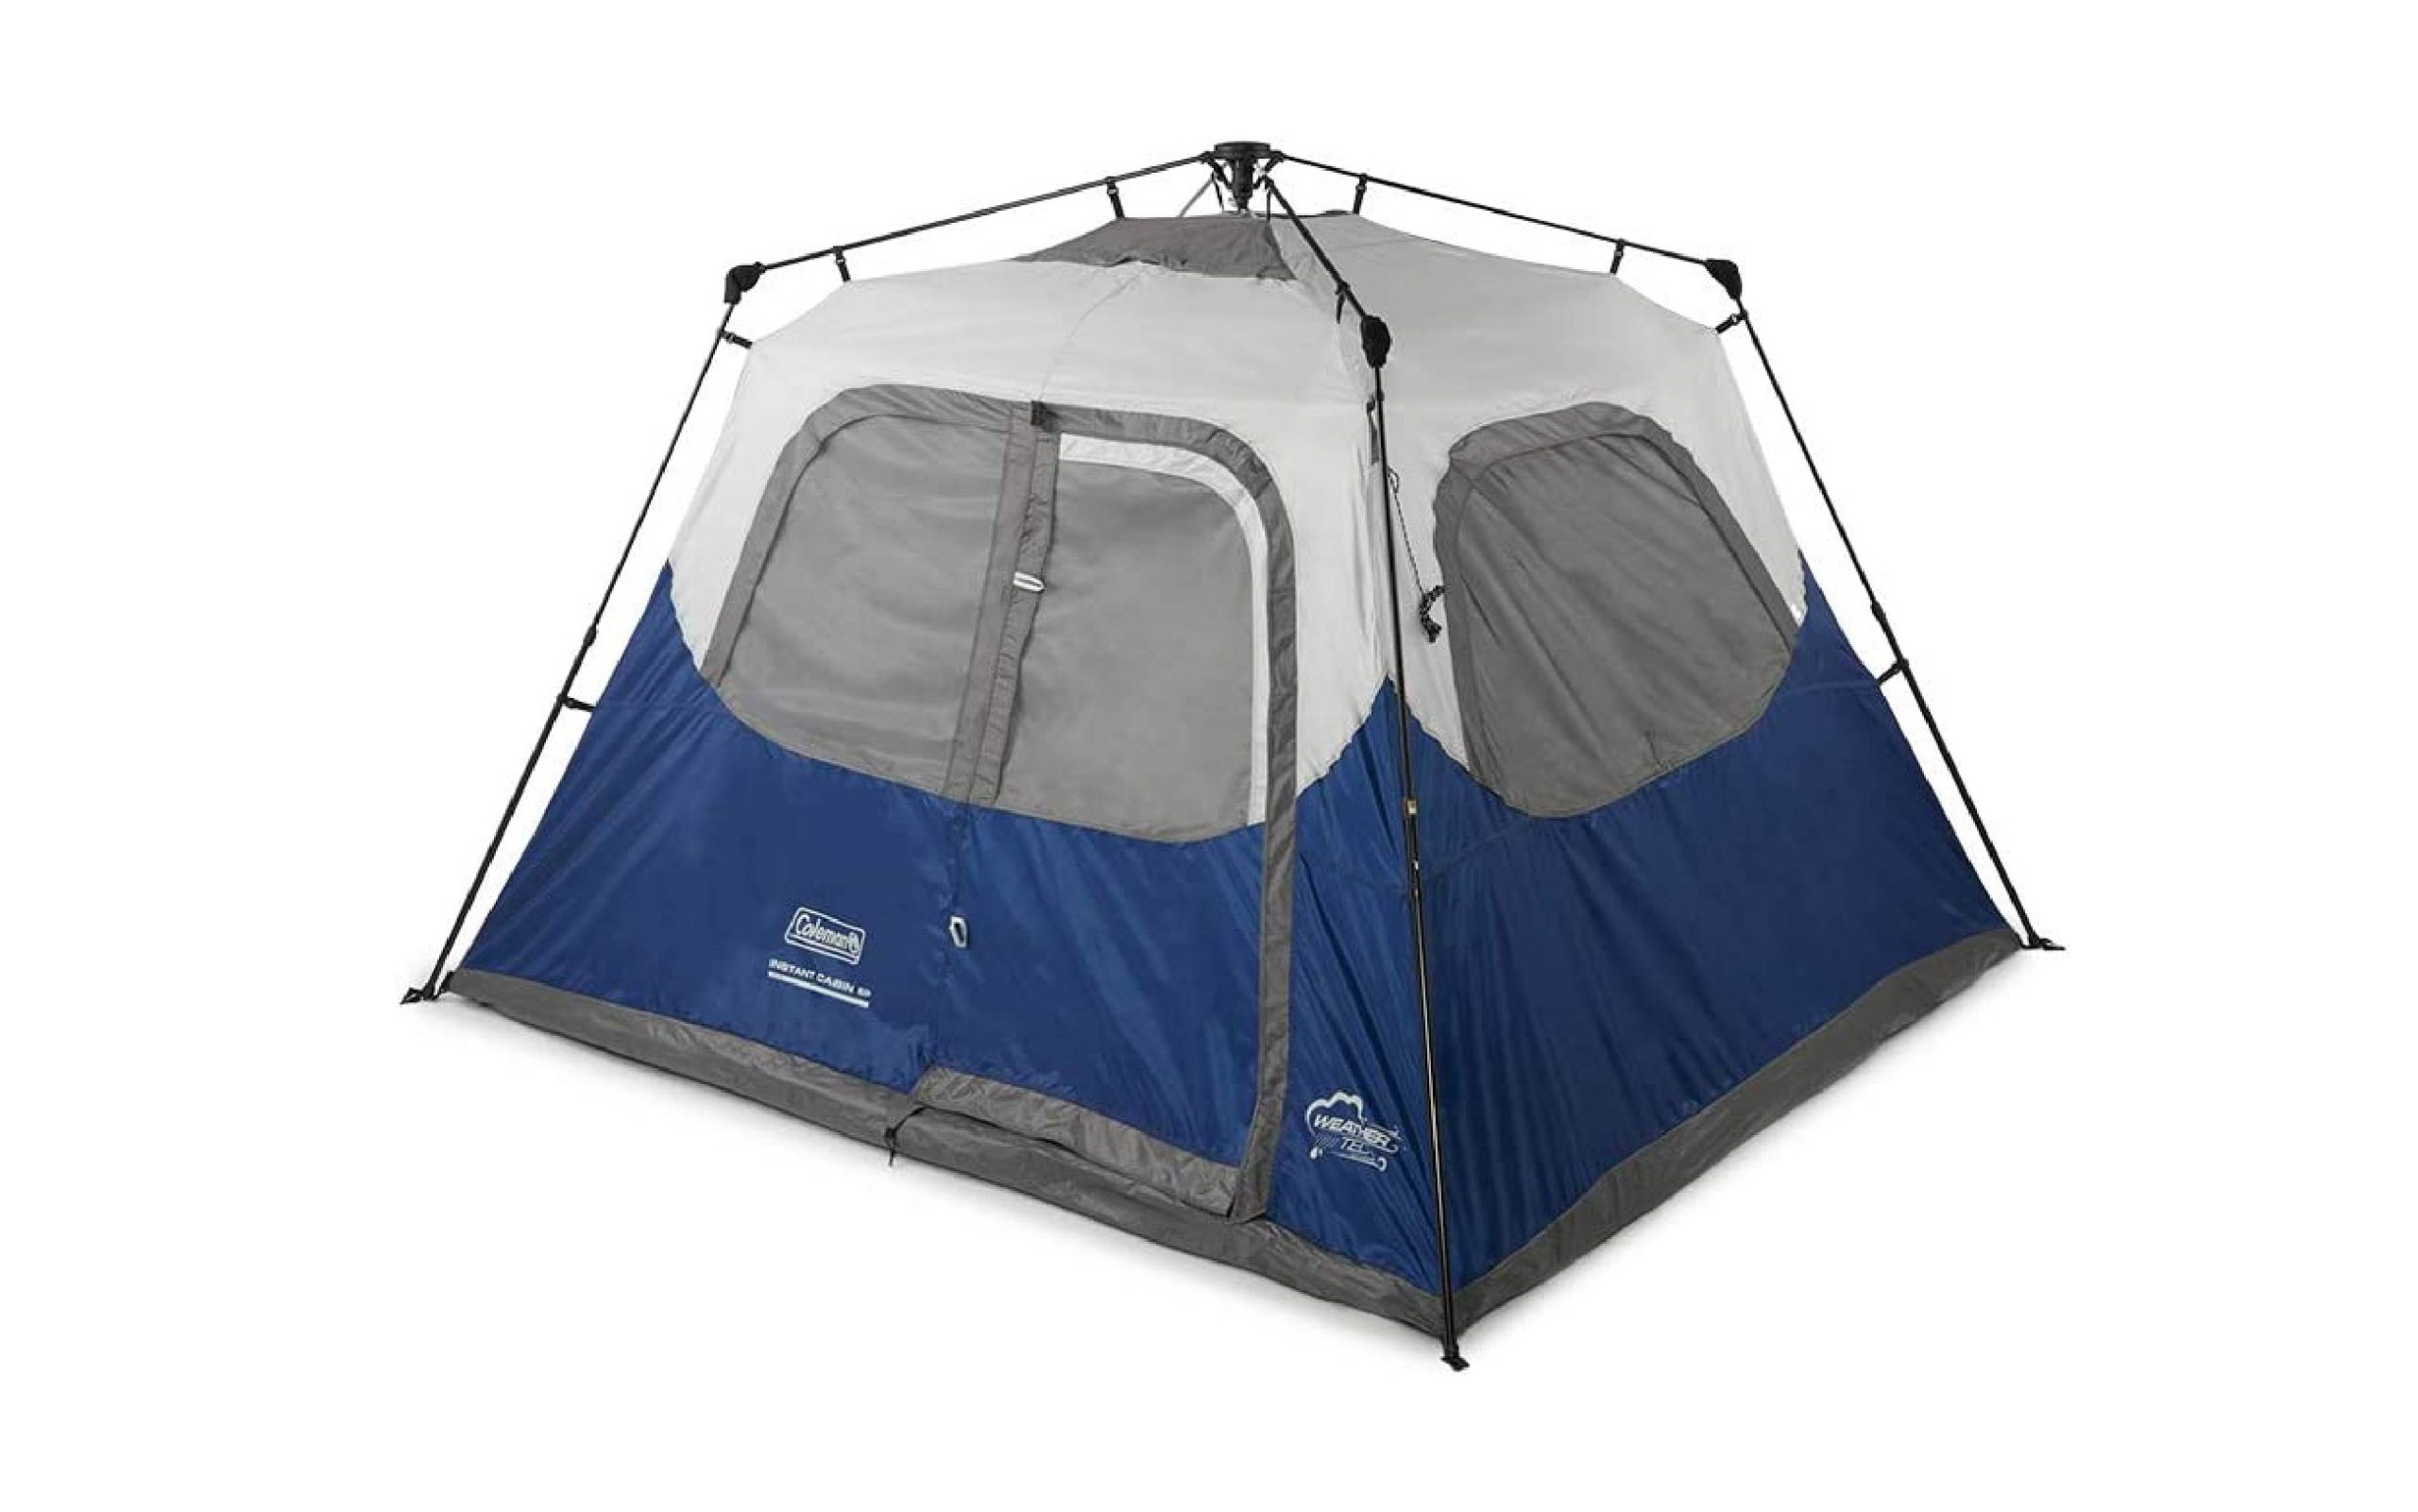 Cool camping gadgets on Amazon